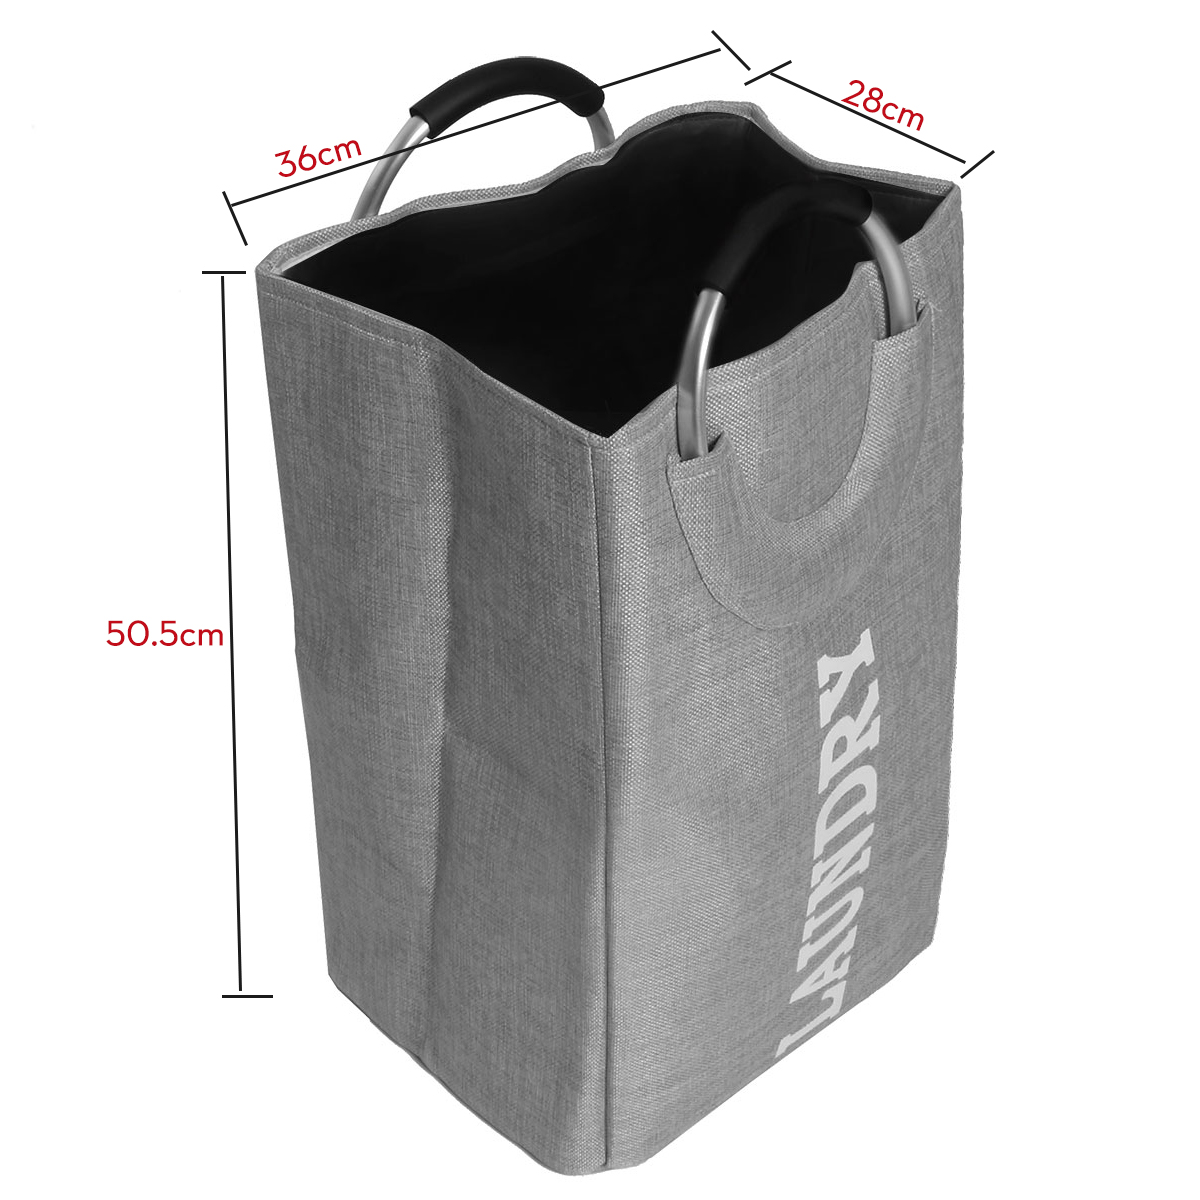 Portable-Foldable-Oxford-Laundry-Washing-Dirty-Clothes-Storage-Baskets-Bag-Hamper-1642044-4